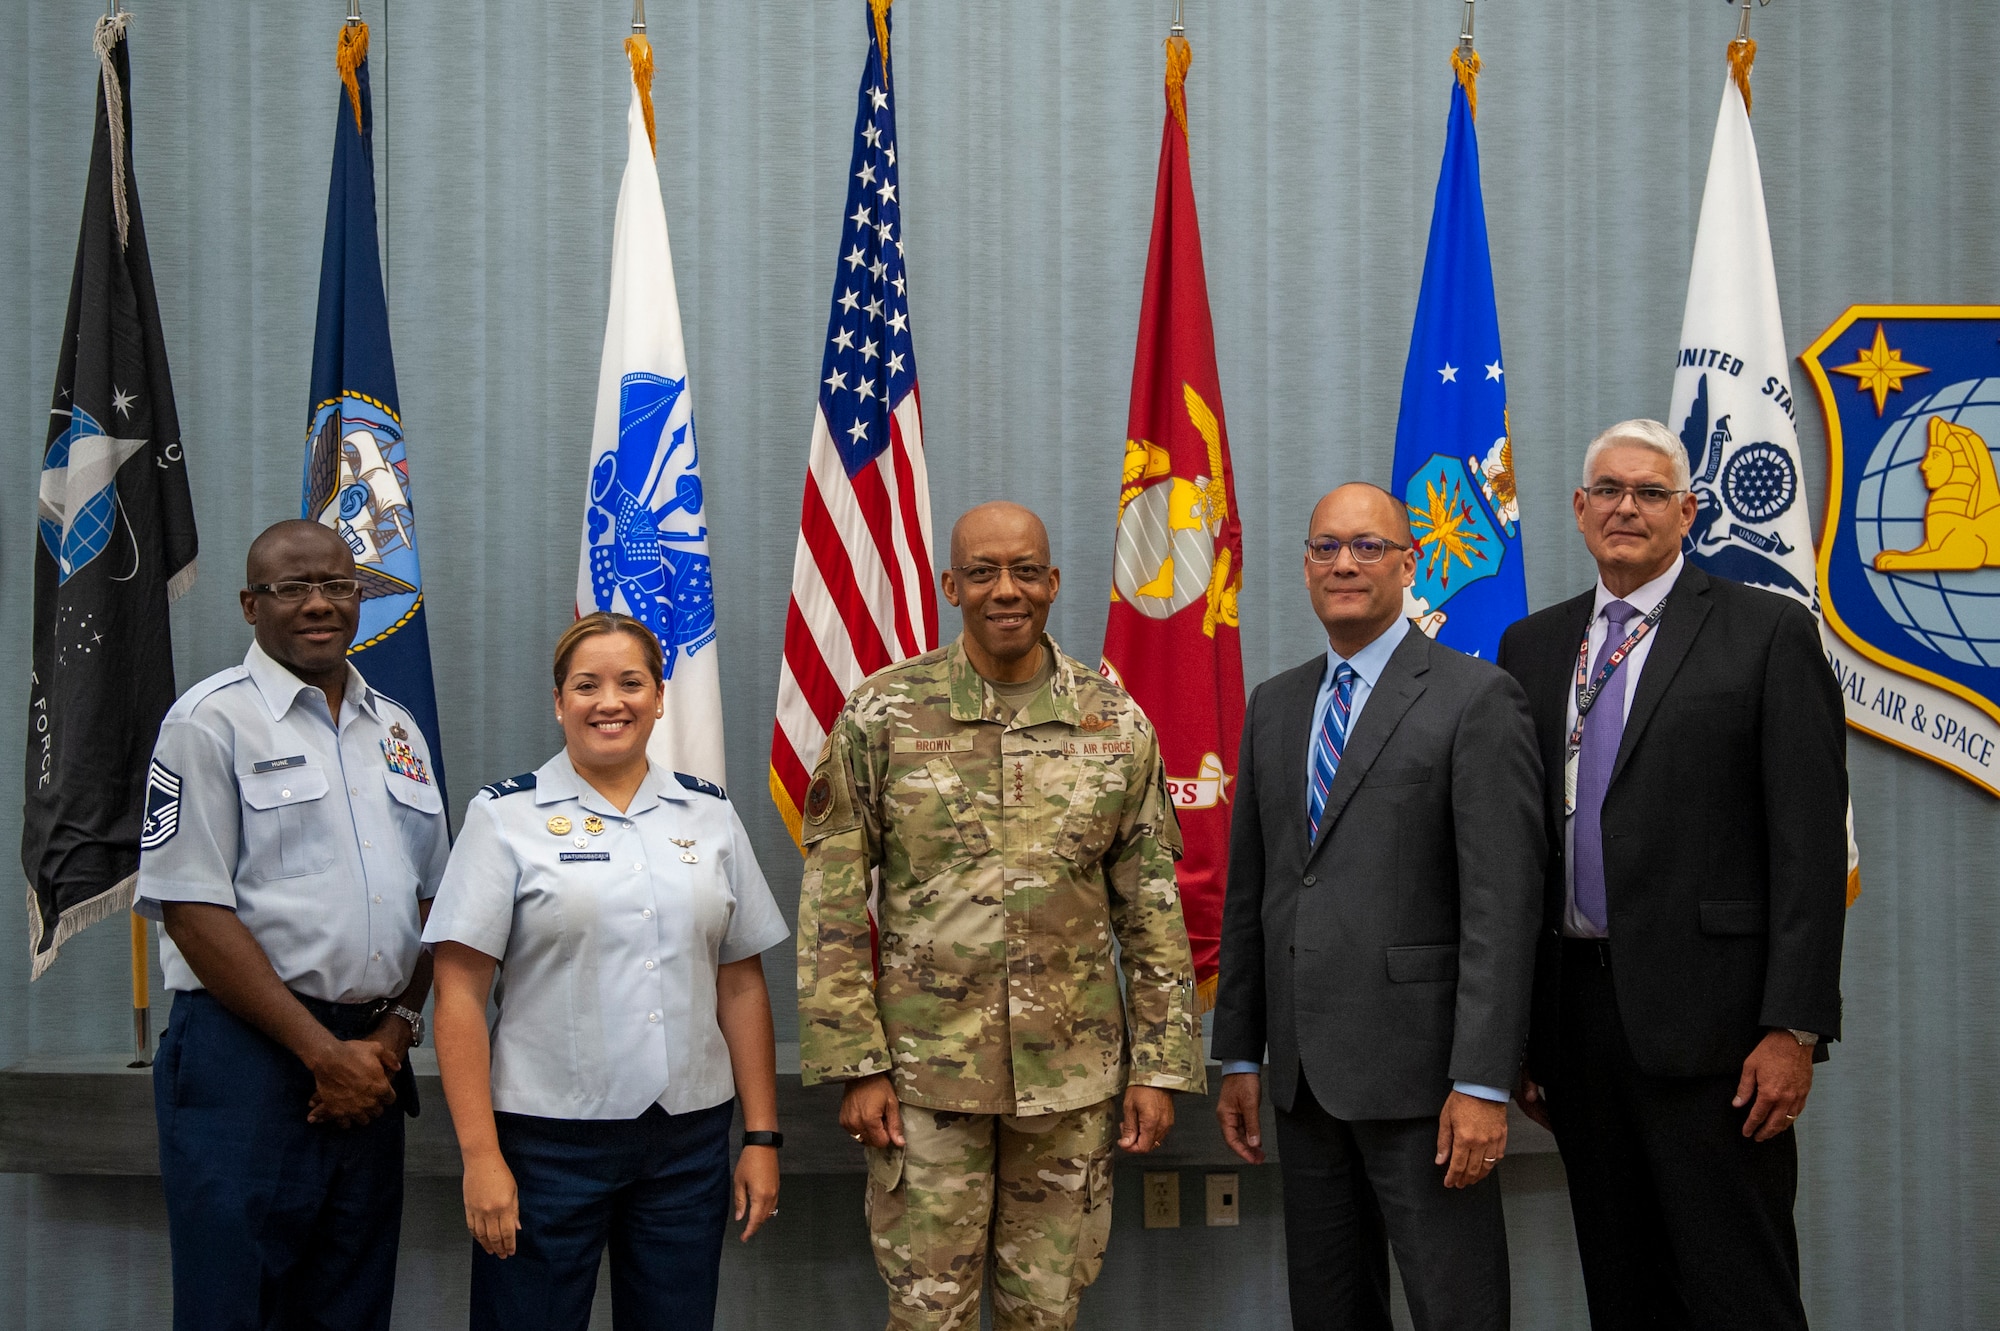 (From left to right) Chief Master Sgt. Tavarus Hune, Global Exploitation Intelligence Group senior enlisted leader, Col. Ariel G. Batungbacal, NASIC commander, Air Force Chief of Staff Gen. CQ Brown, Jr., Duane W. Harrison, NASIC Chief Scientist and Joseph W. Herrmann, NASIC Chief of Staff, pose for a photograph at Wright-Patterson Air Force Base, Ohio, July 31, 2023. Earlier that day, they provided Brown a tour and a series of intelligence briefings.